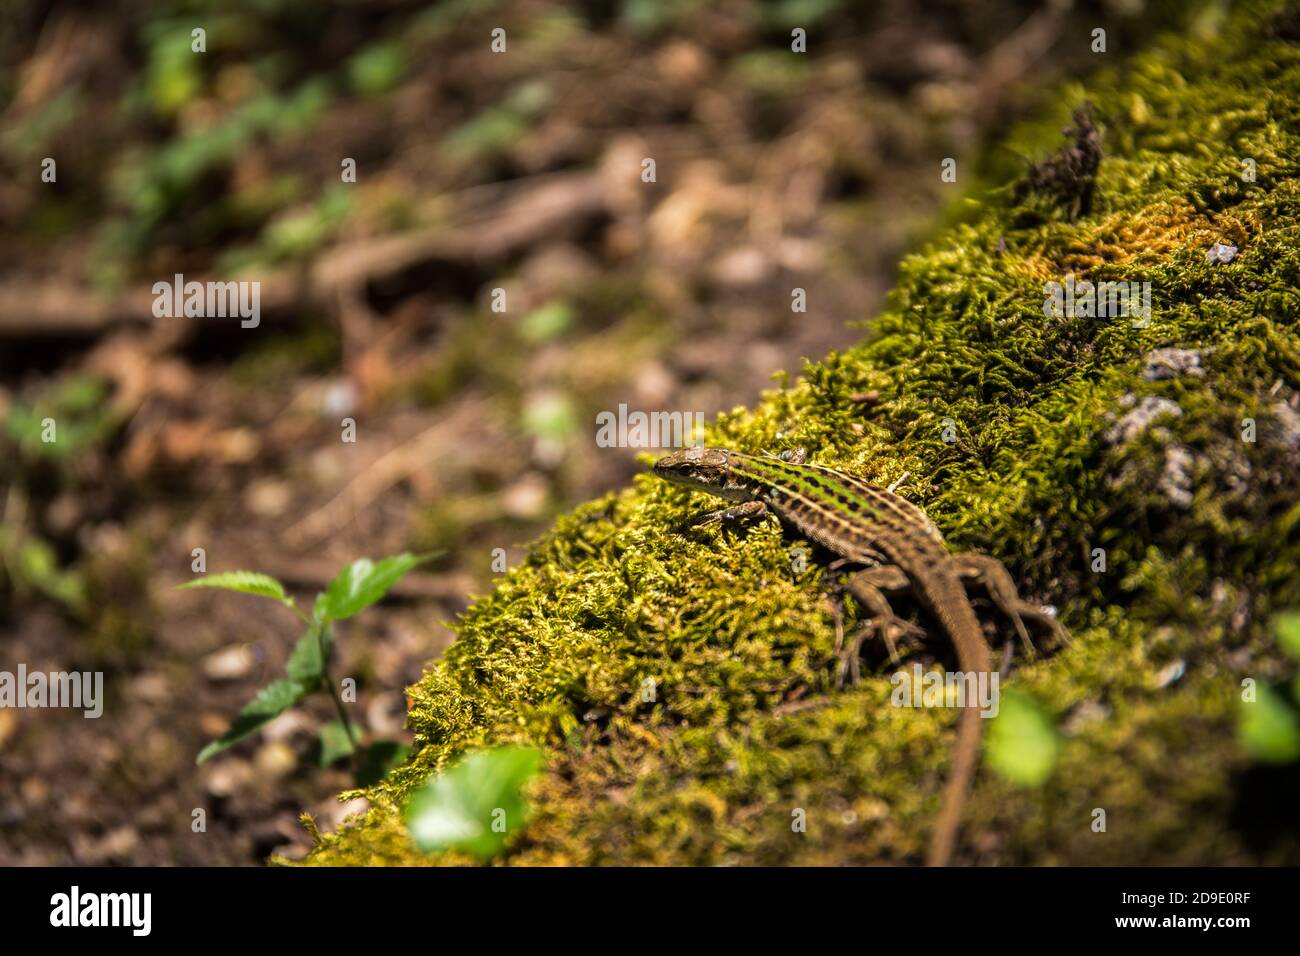 Small brown lizard Lacertilla on the grass in a forest Stock Photo